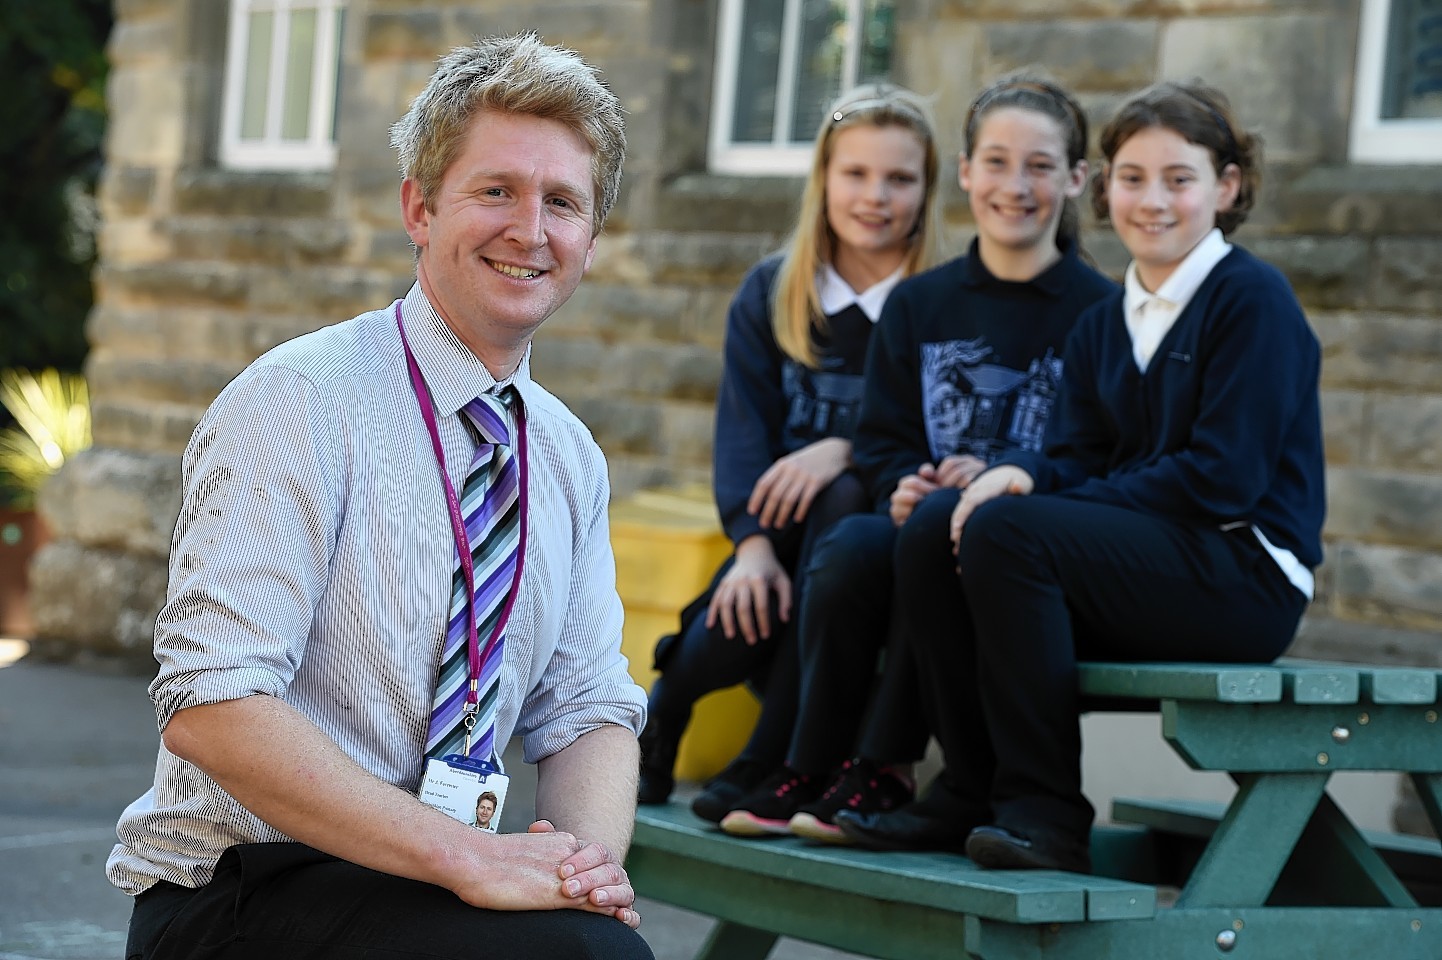 Auchenblae Primary School teacher John Forrester with pupils Millie Ptaszek, 11, Orla Hendry, 10, and Rihanna Morgan, 11.Picture by Kenny Elrick